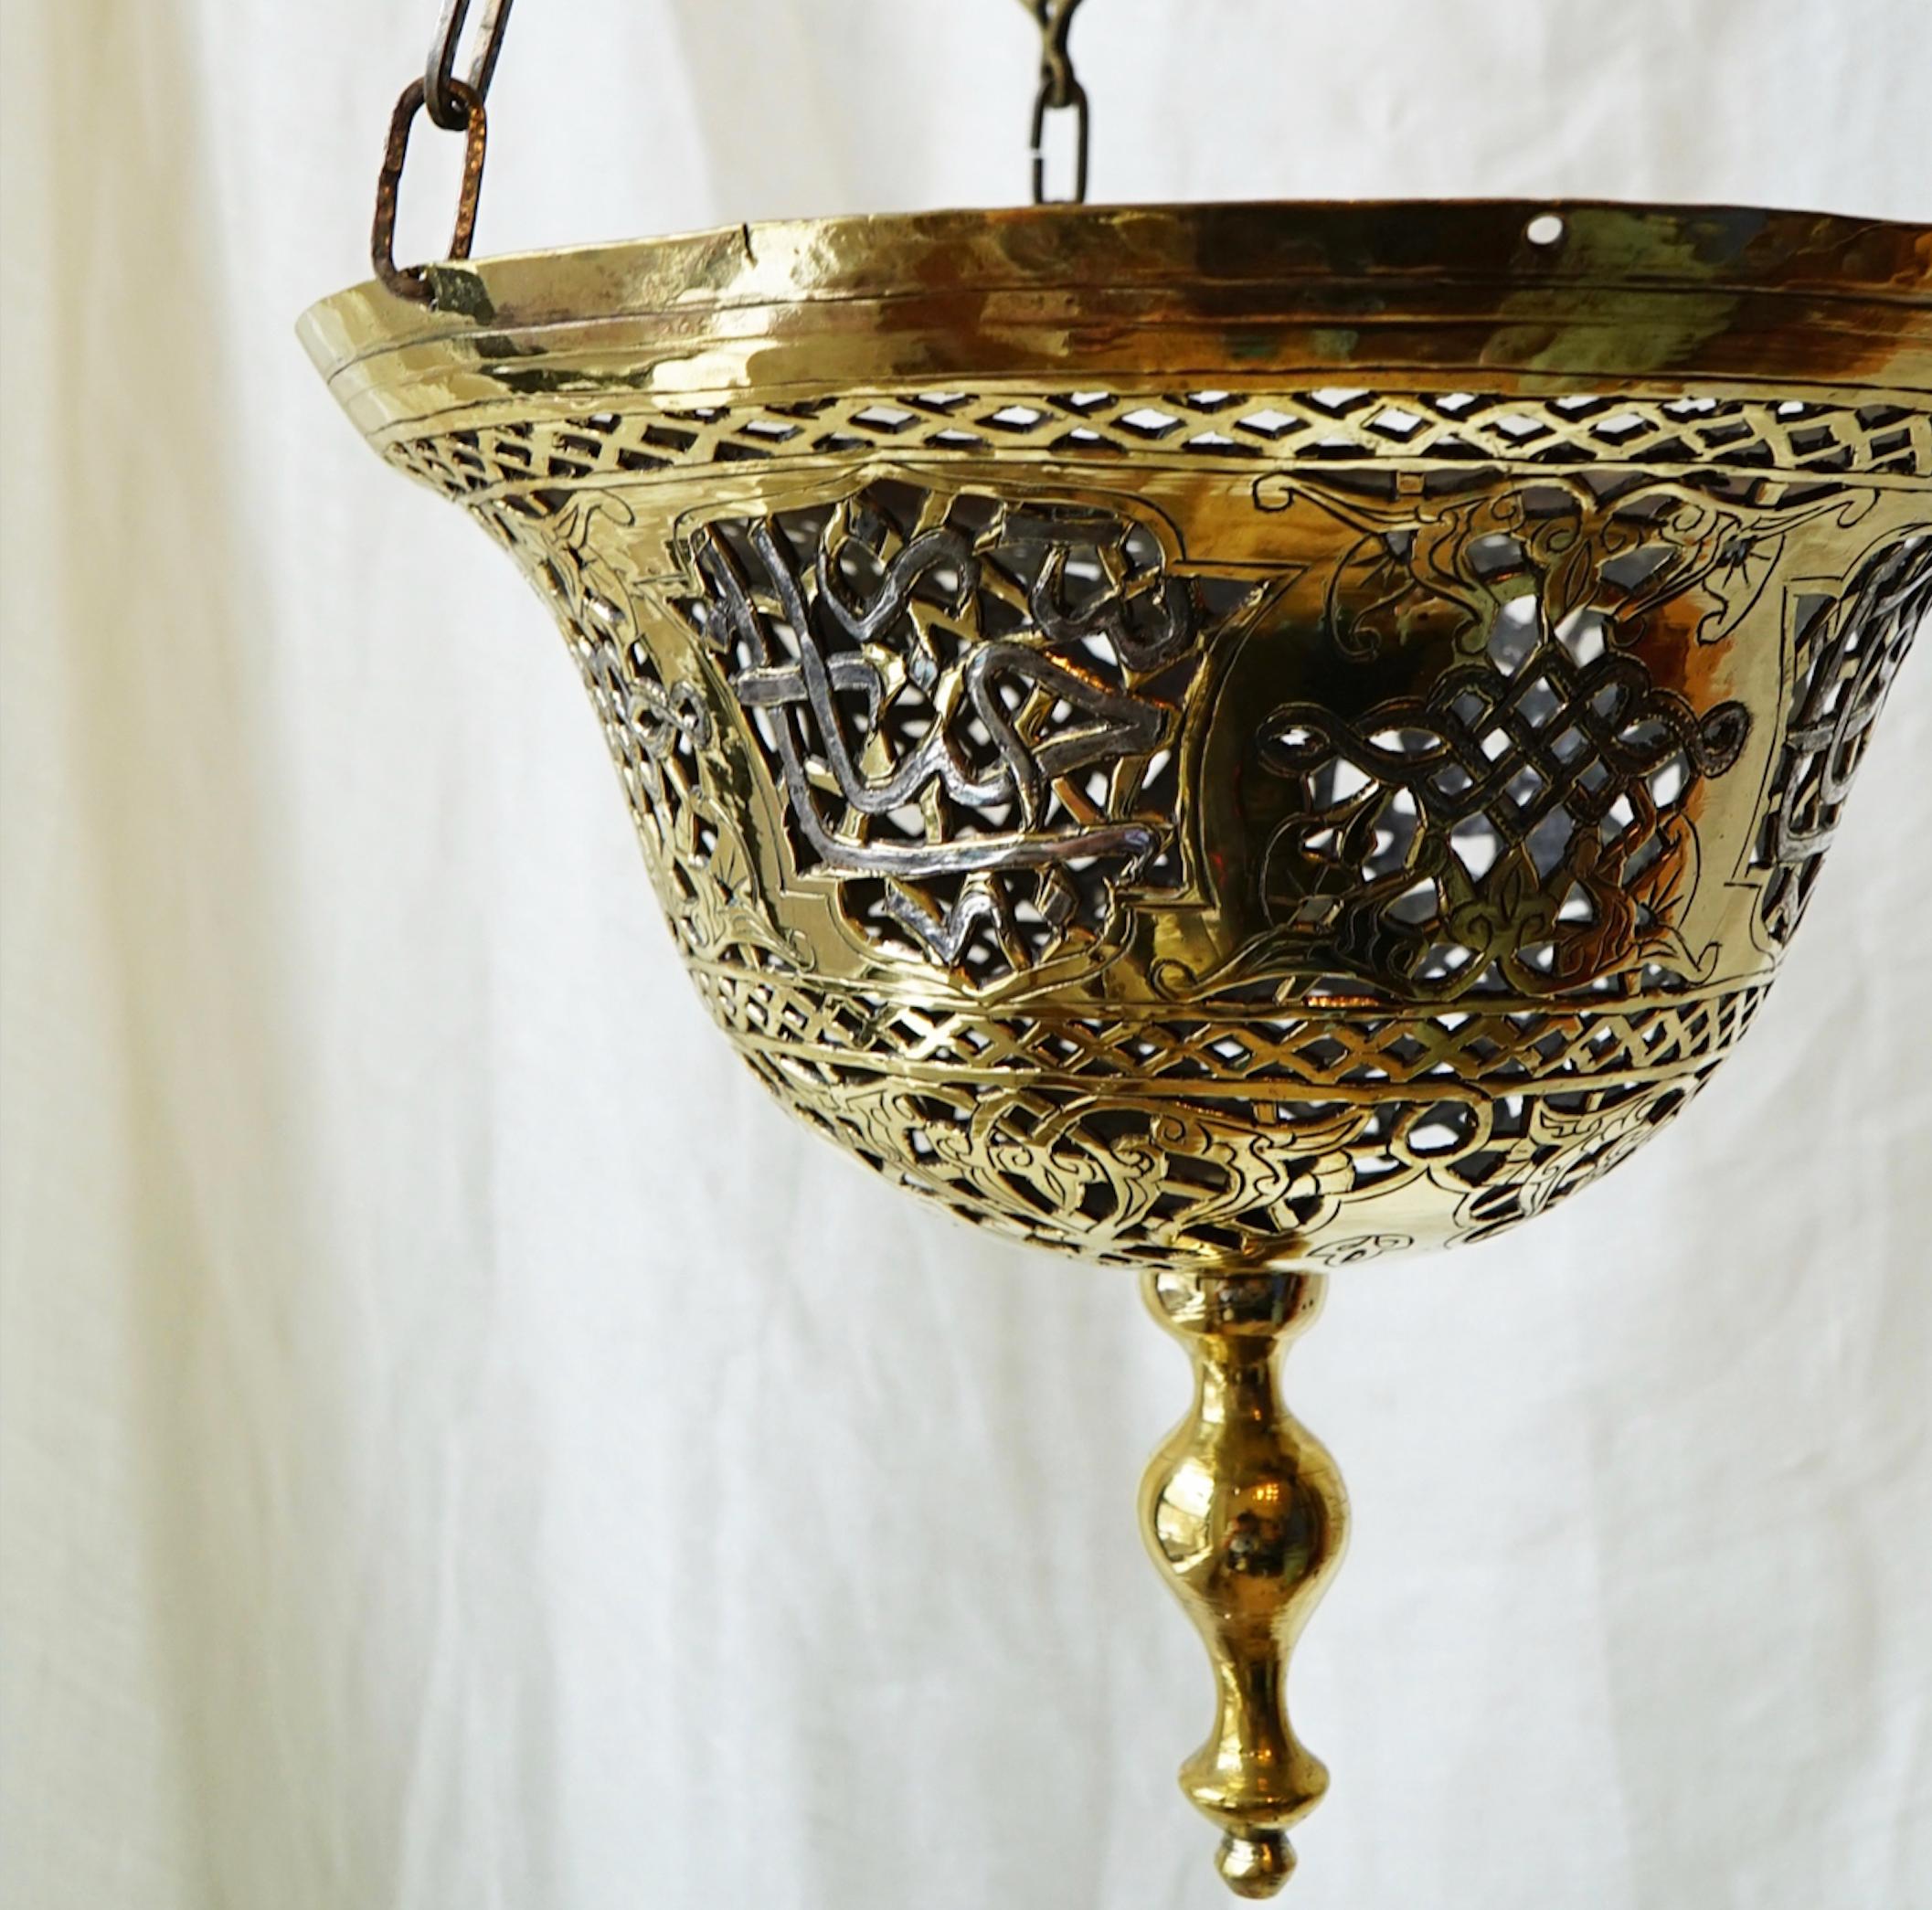 This pierced metalwork pendant from the 1940s which throws filtered light on the walls and ceilings, features Arabic calligraphy. These fixtures used to be quite common in the Imperial Moroccan cities of that time but have become rare to find. This